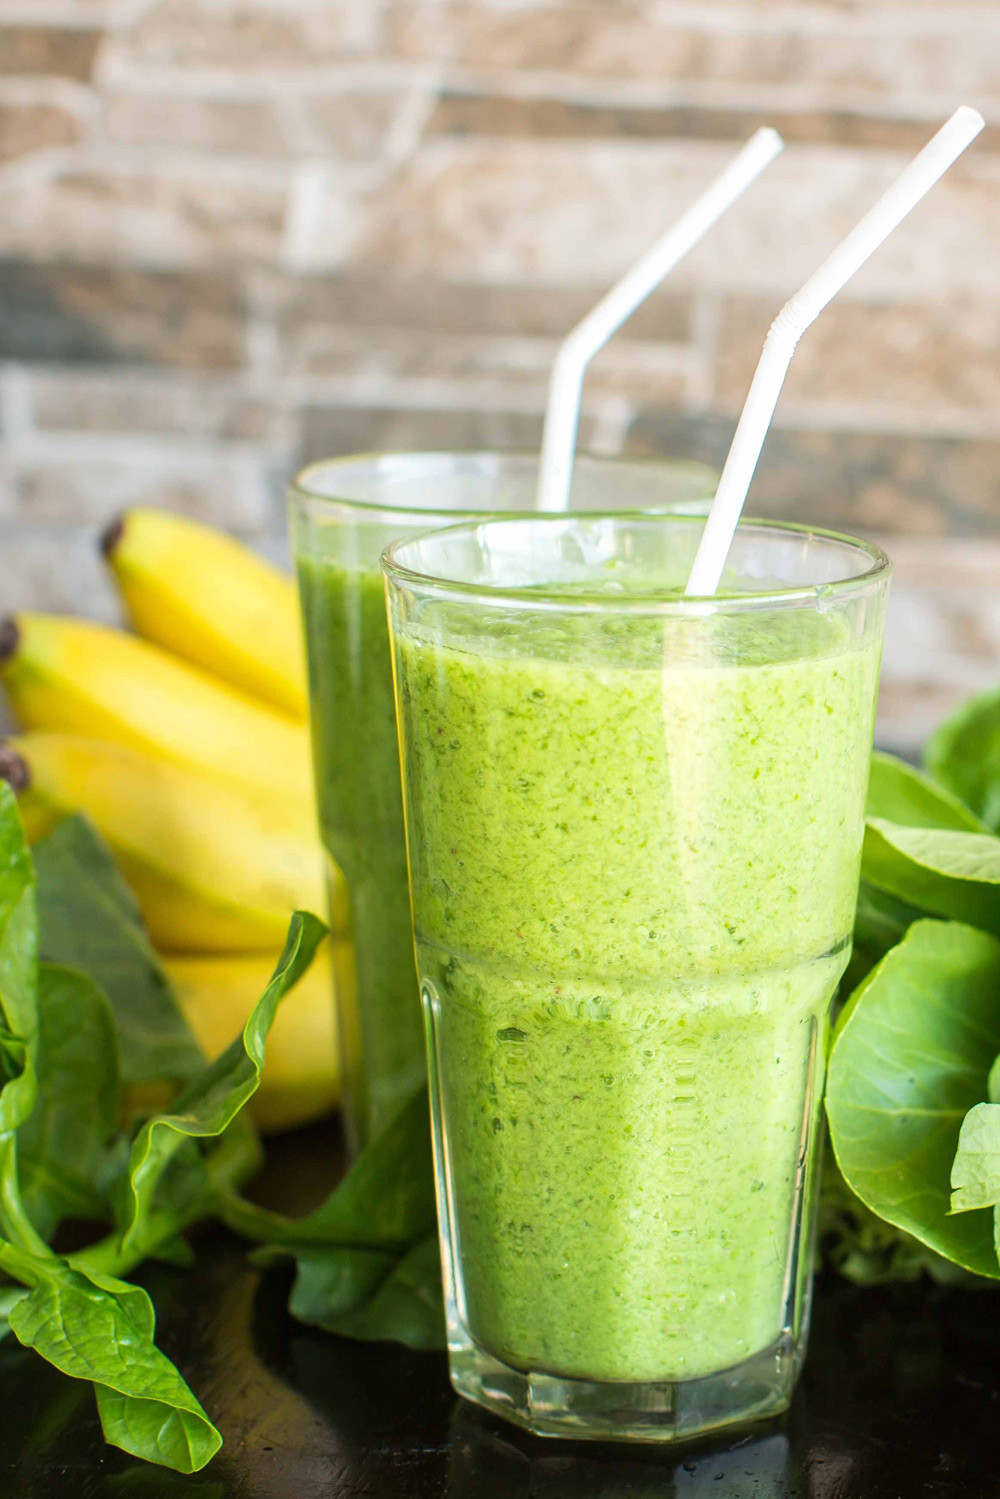 Healthy Smoothies For Kids With Veggies
 Healthy Green Ve able Smoothie Shake Recipe for Kids